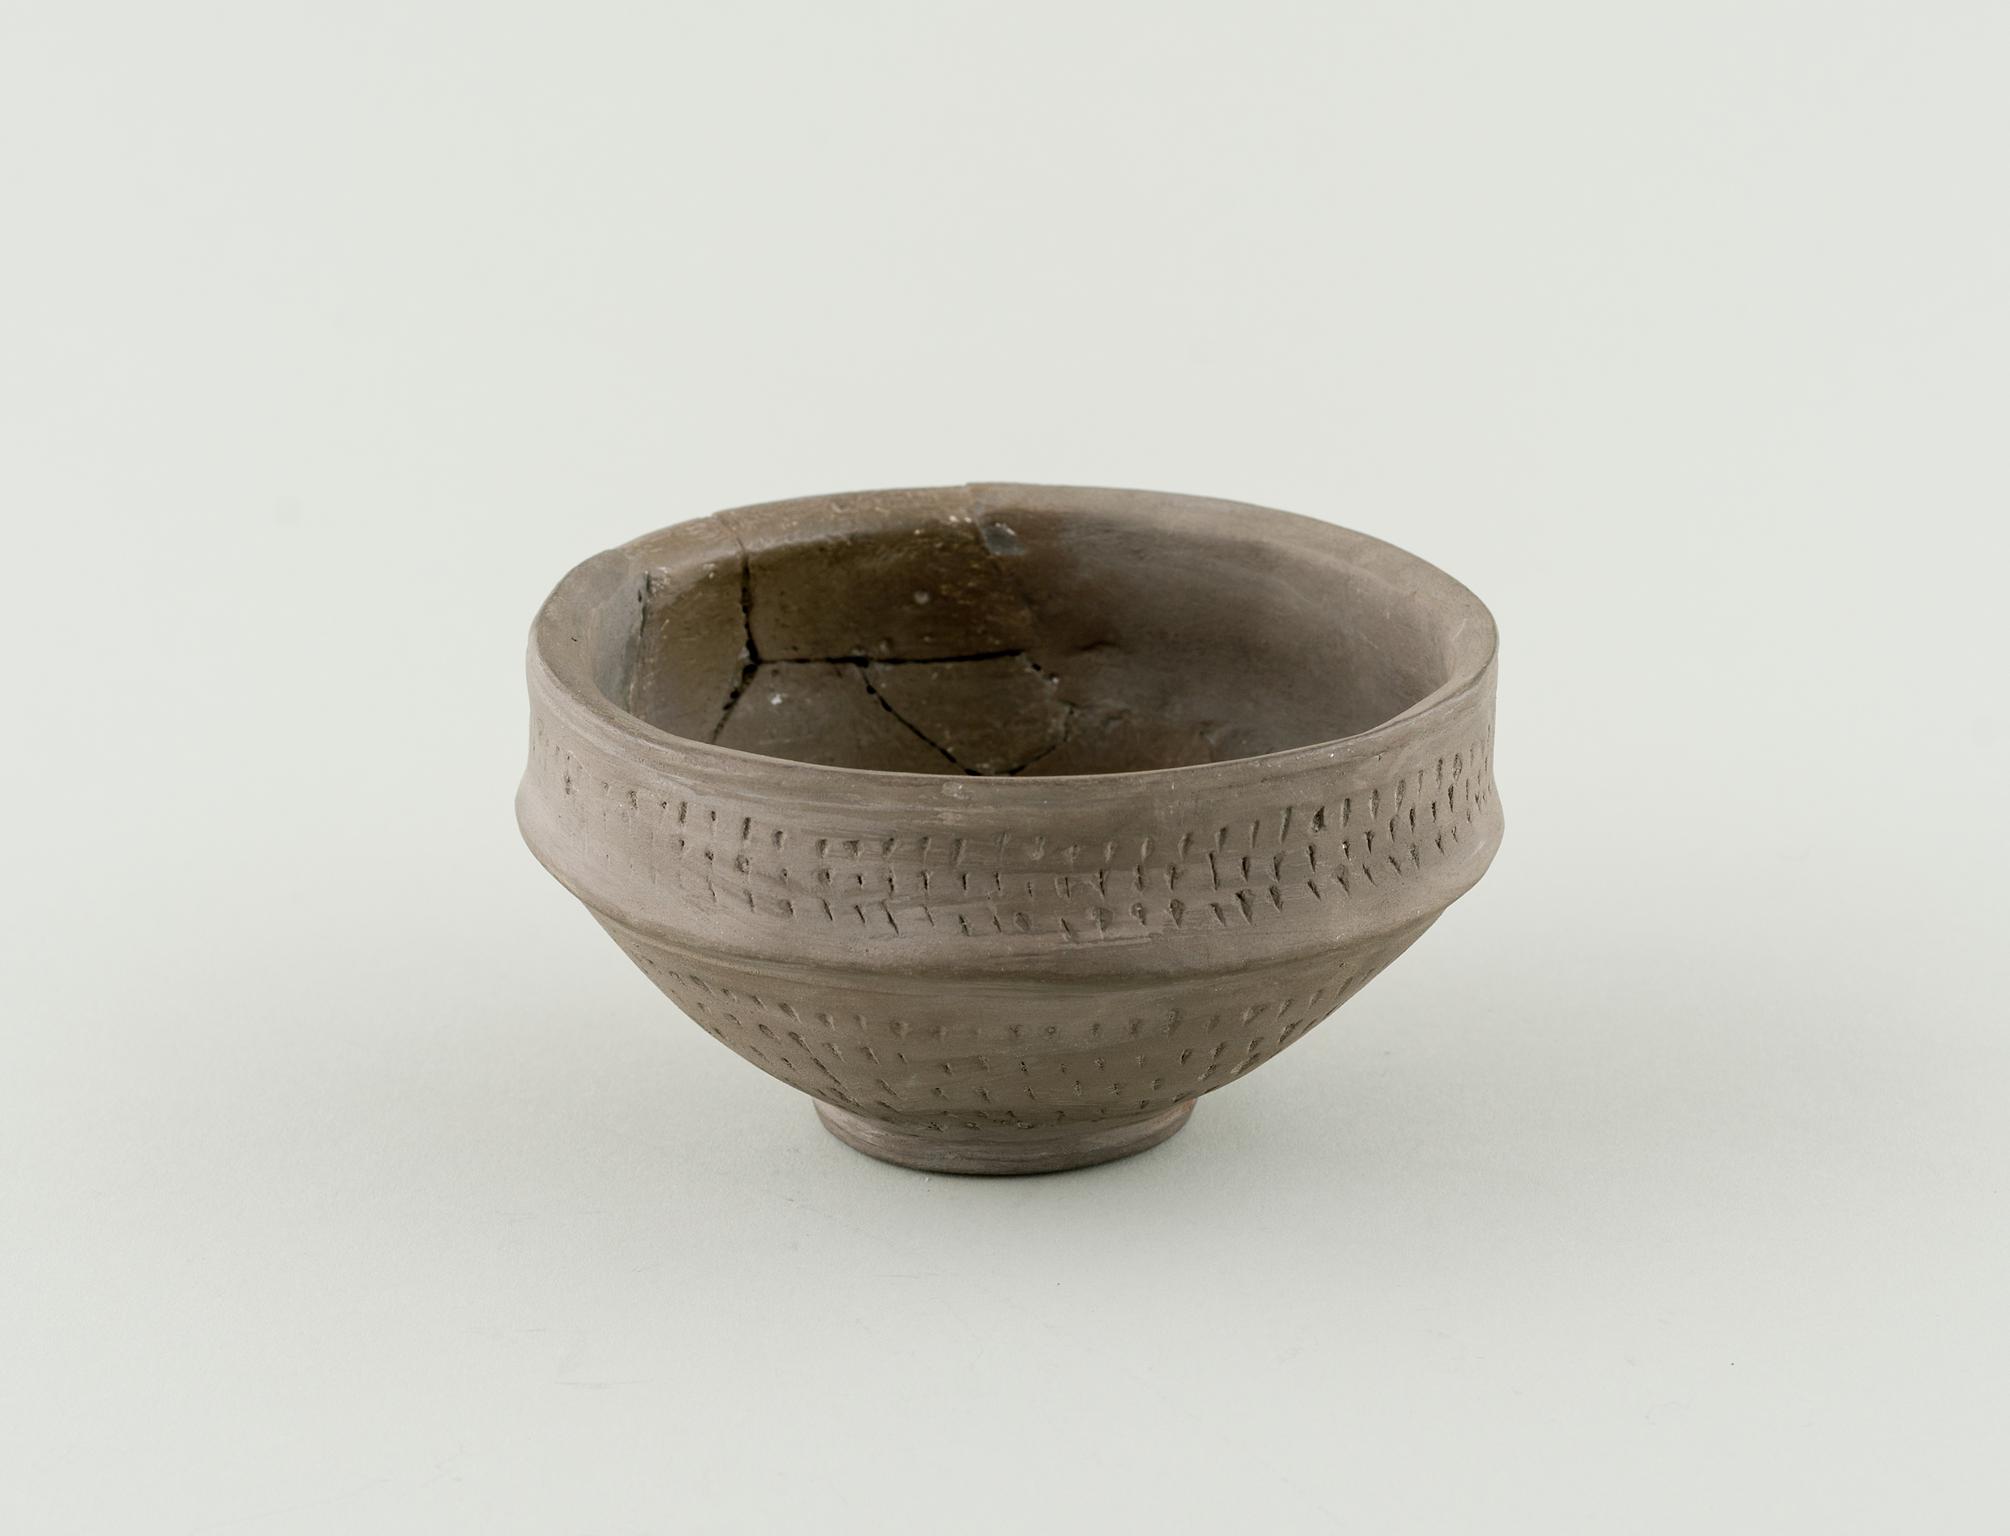 Early Medieval pottery bowl